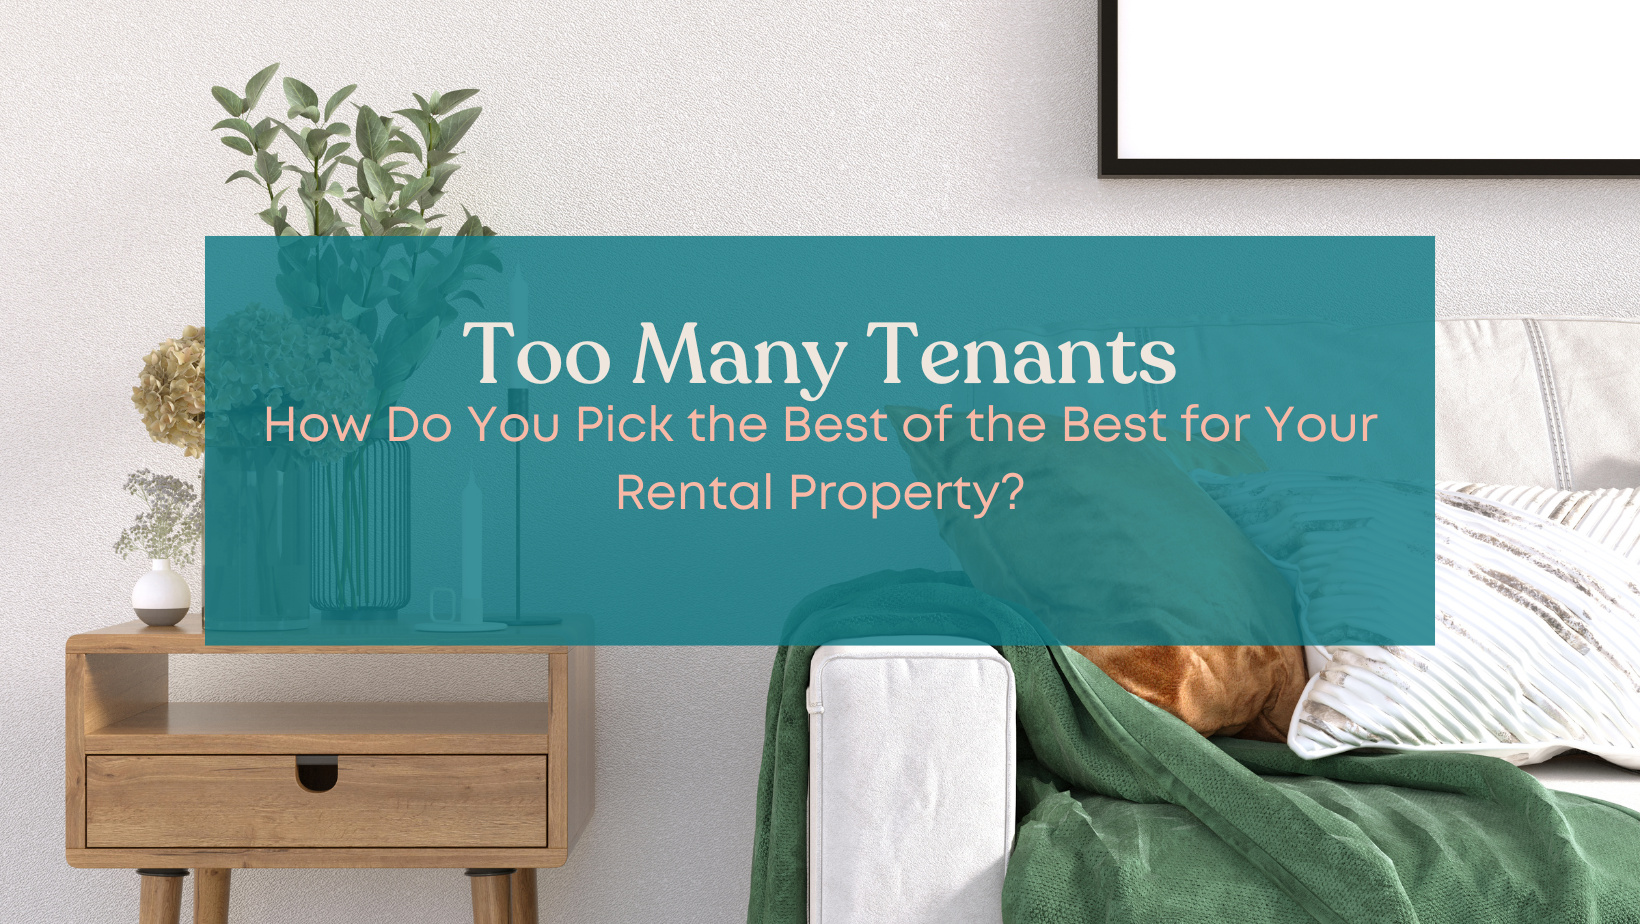 How to Pick the Best Tenant for Your Property